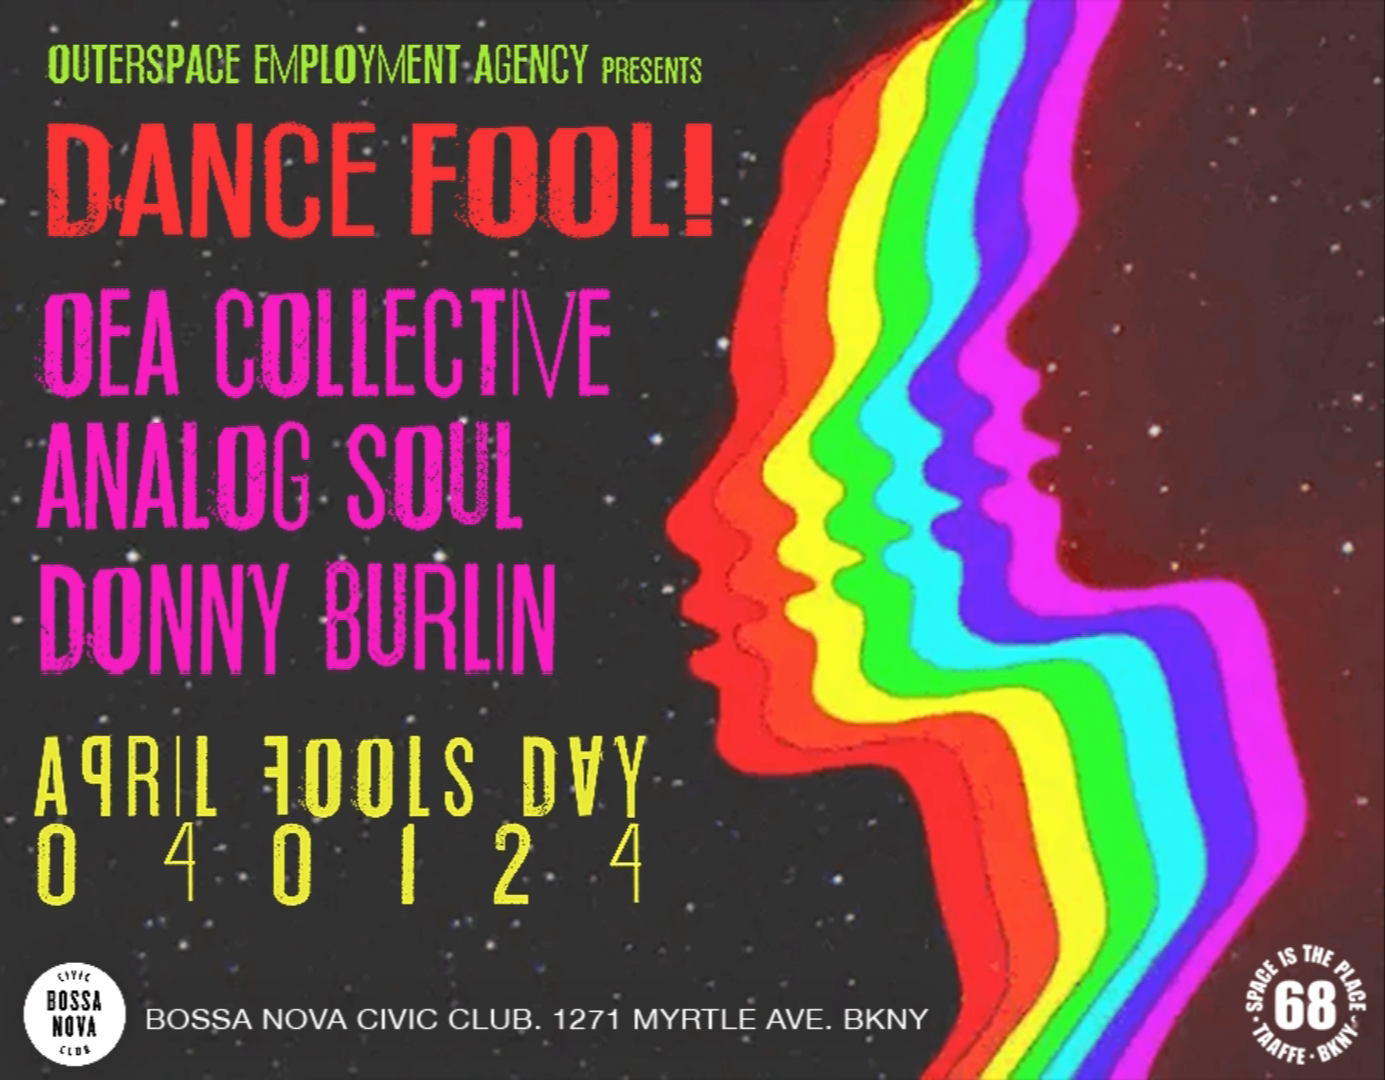 Analog Soul + Donny Burlin = OEA Collective- DANCE FOOL!/Outerspace Employment Agency presents: - Página frontal